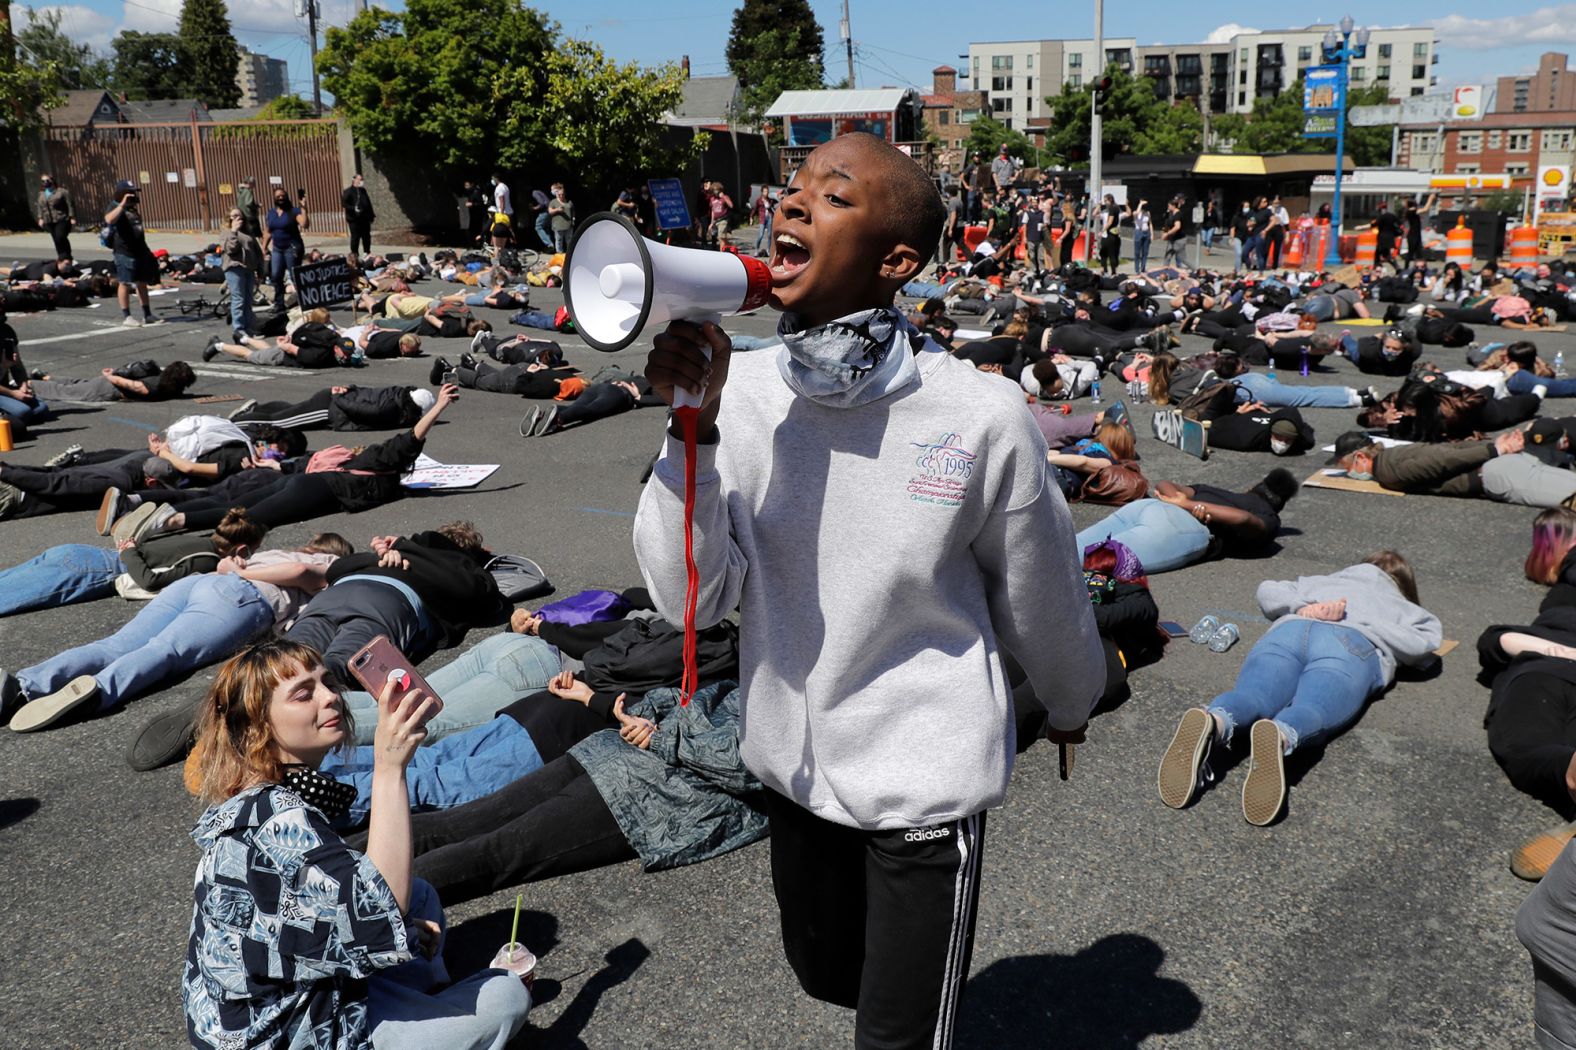 A protester leads chants with a megaphone as others block traffic while lying face-down on the street in Tacoma, Washington, for 8 minutes and 46 seconds on Monday, June 1. That's how long a police officer had his knee on Floyd's neck.